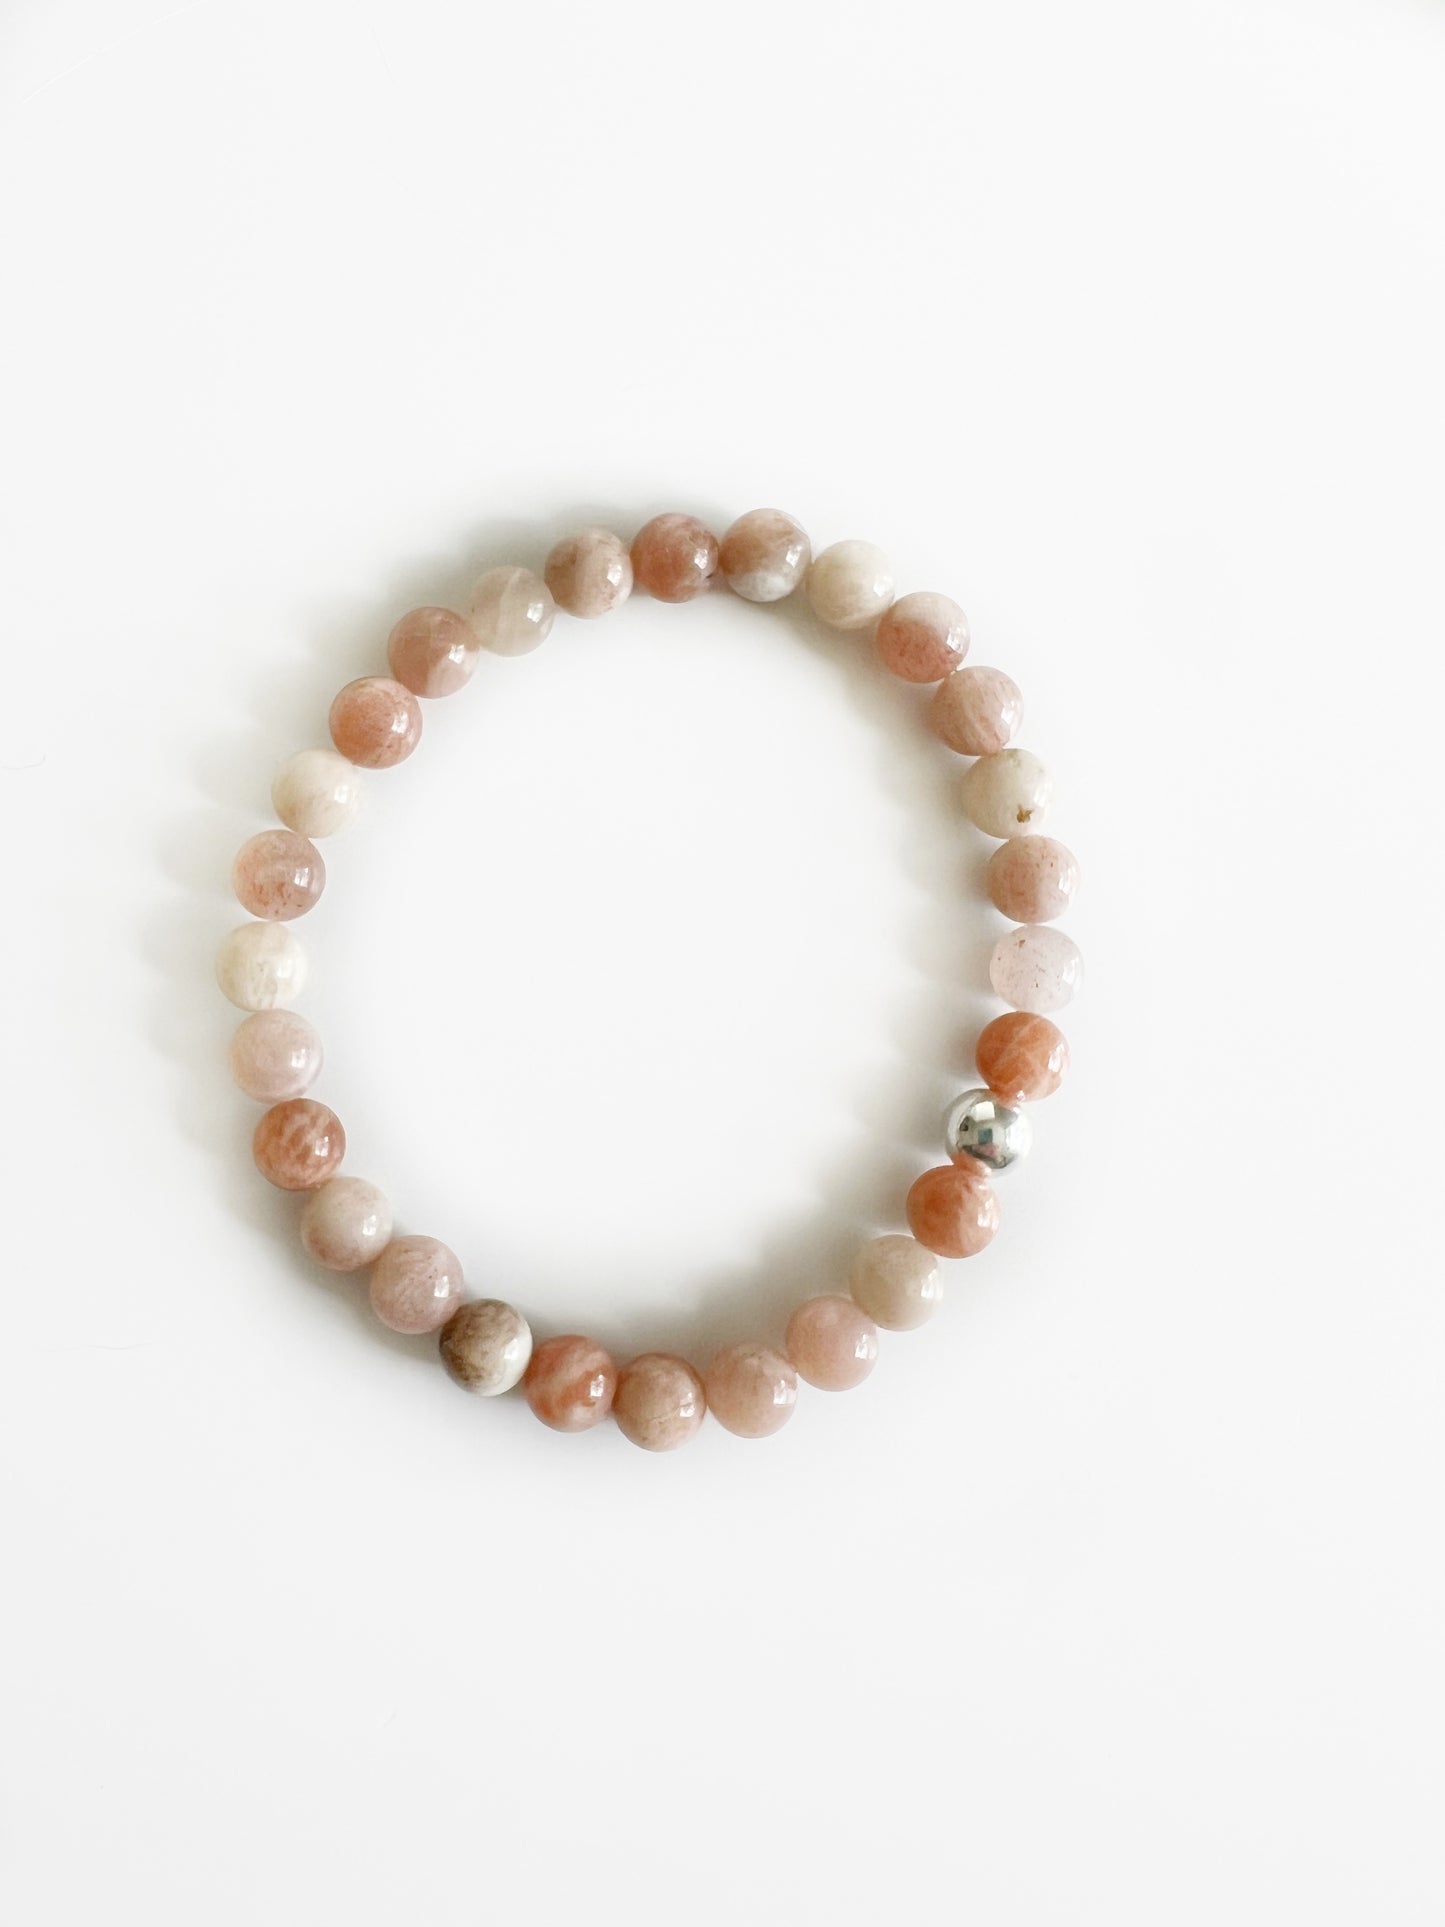 peach moonstone stretch bracelet with one silver bead on a white background